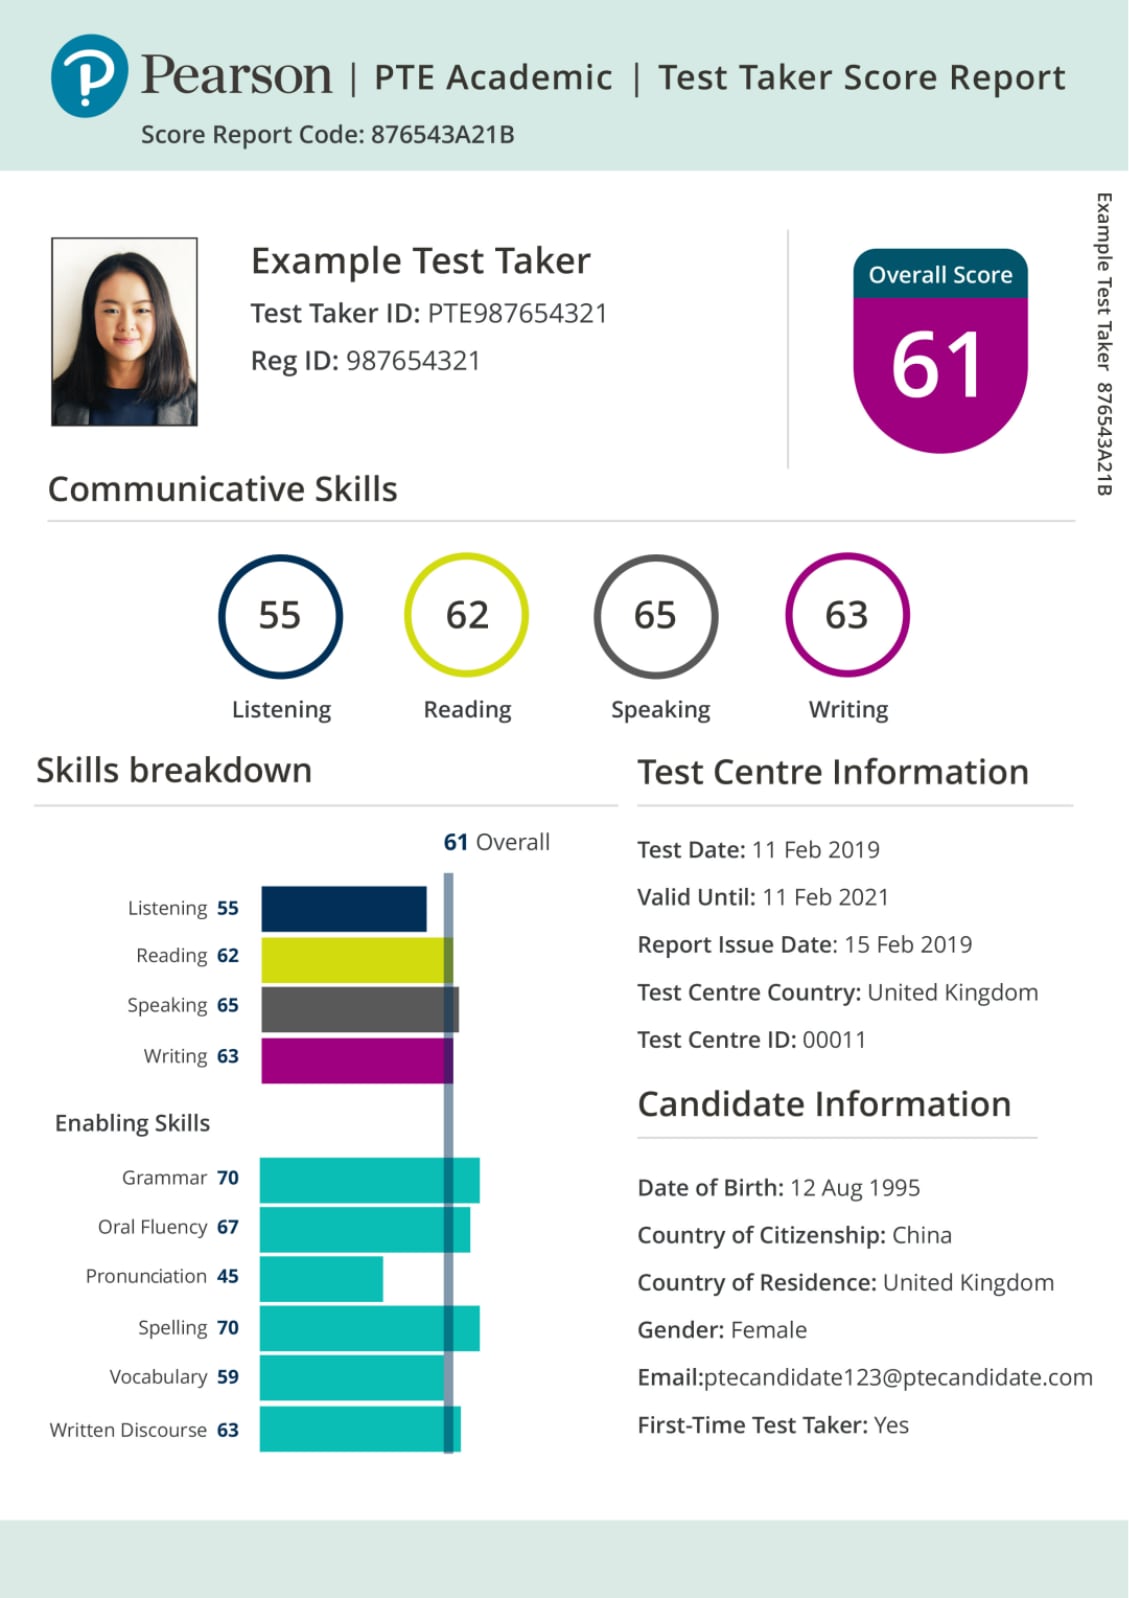 A copy of a PTE test report -  with the text:  Pearson | PTE Academic | Test Taker Score Report Score Report Code: 876543A21B Example Test Taker Overall Score Test Taker ID: PTE987654321 Reg ID: 987654321 61 Communicative Skills 55 62 65 63 Listening Reading Speaking Skills breakdown Writing Test Centre Information 61 Overall Test Date: 11 Feb 2019 Example Test Taker 876543A21B Listening 55 Reading 62 Speaking 65 Writing 63 Enabling Skills Grammar 70 Oral Fluency 67 Pronunciation 45 Spelling 70 Vocabulary 59 Written Discourse 63 Valid Until: 11 Feb 2021 Report Issue Date: 15 Feb 2019 Test Centre Country: United Kingdom Test Centre ID: 00011 Candidate Information Date of Birth: 12 Aug 1995 Country of Citizenship: China Country of Residence: United Kingdom Gender: Female Email:ptecandidate 123@ptecandidate.com First-Time Test Taker: Yes